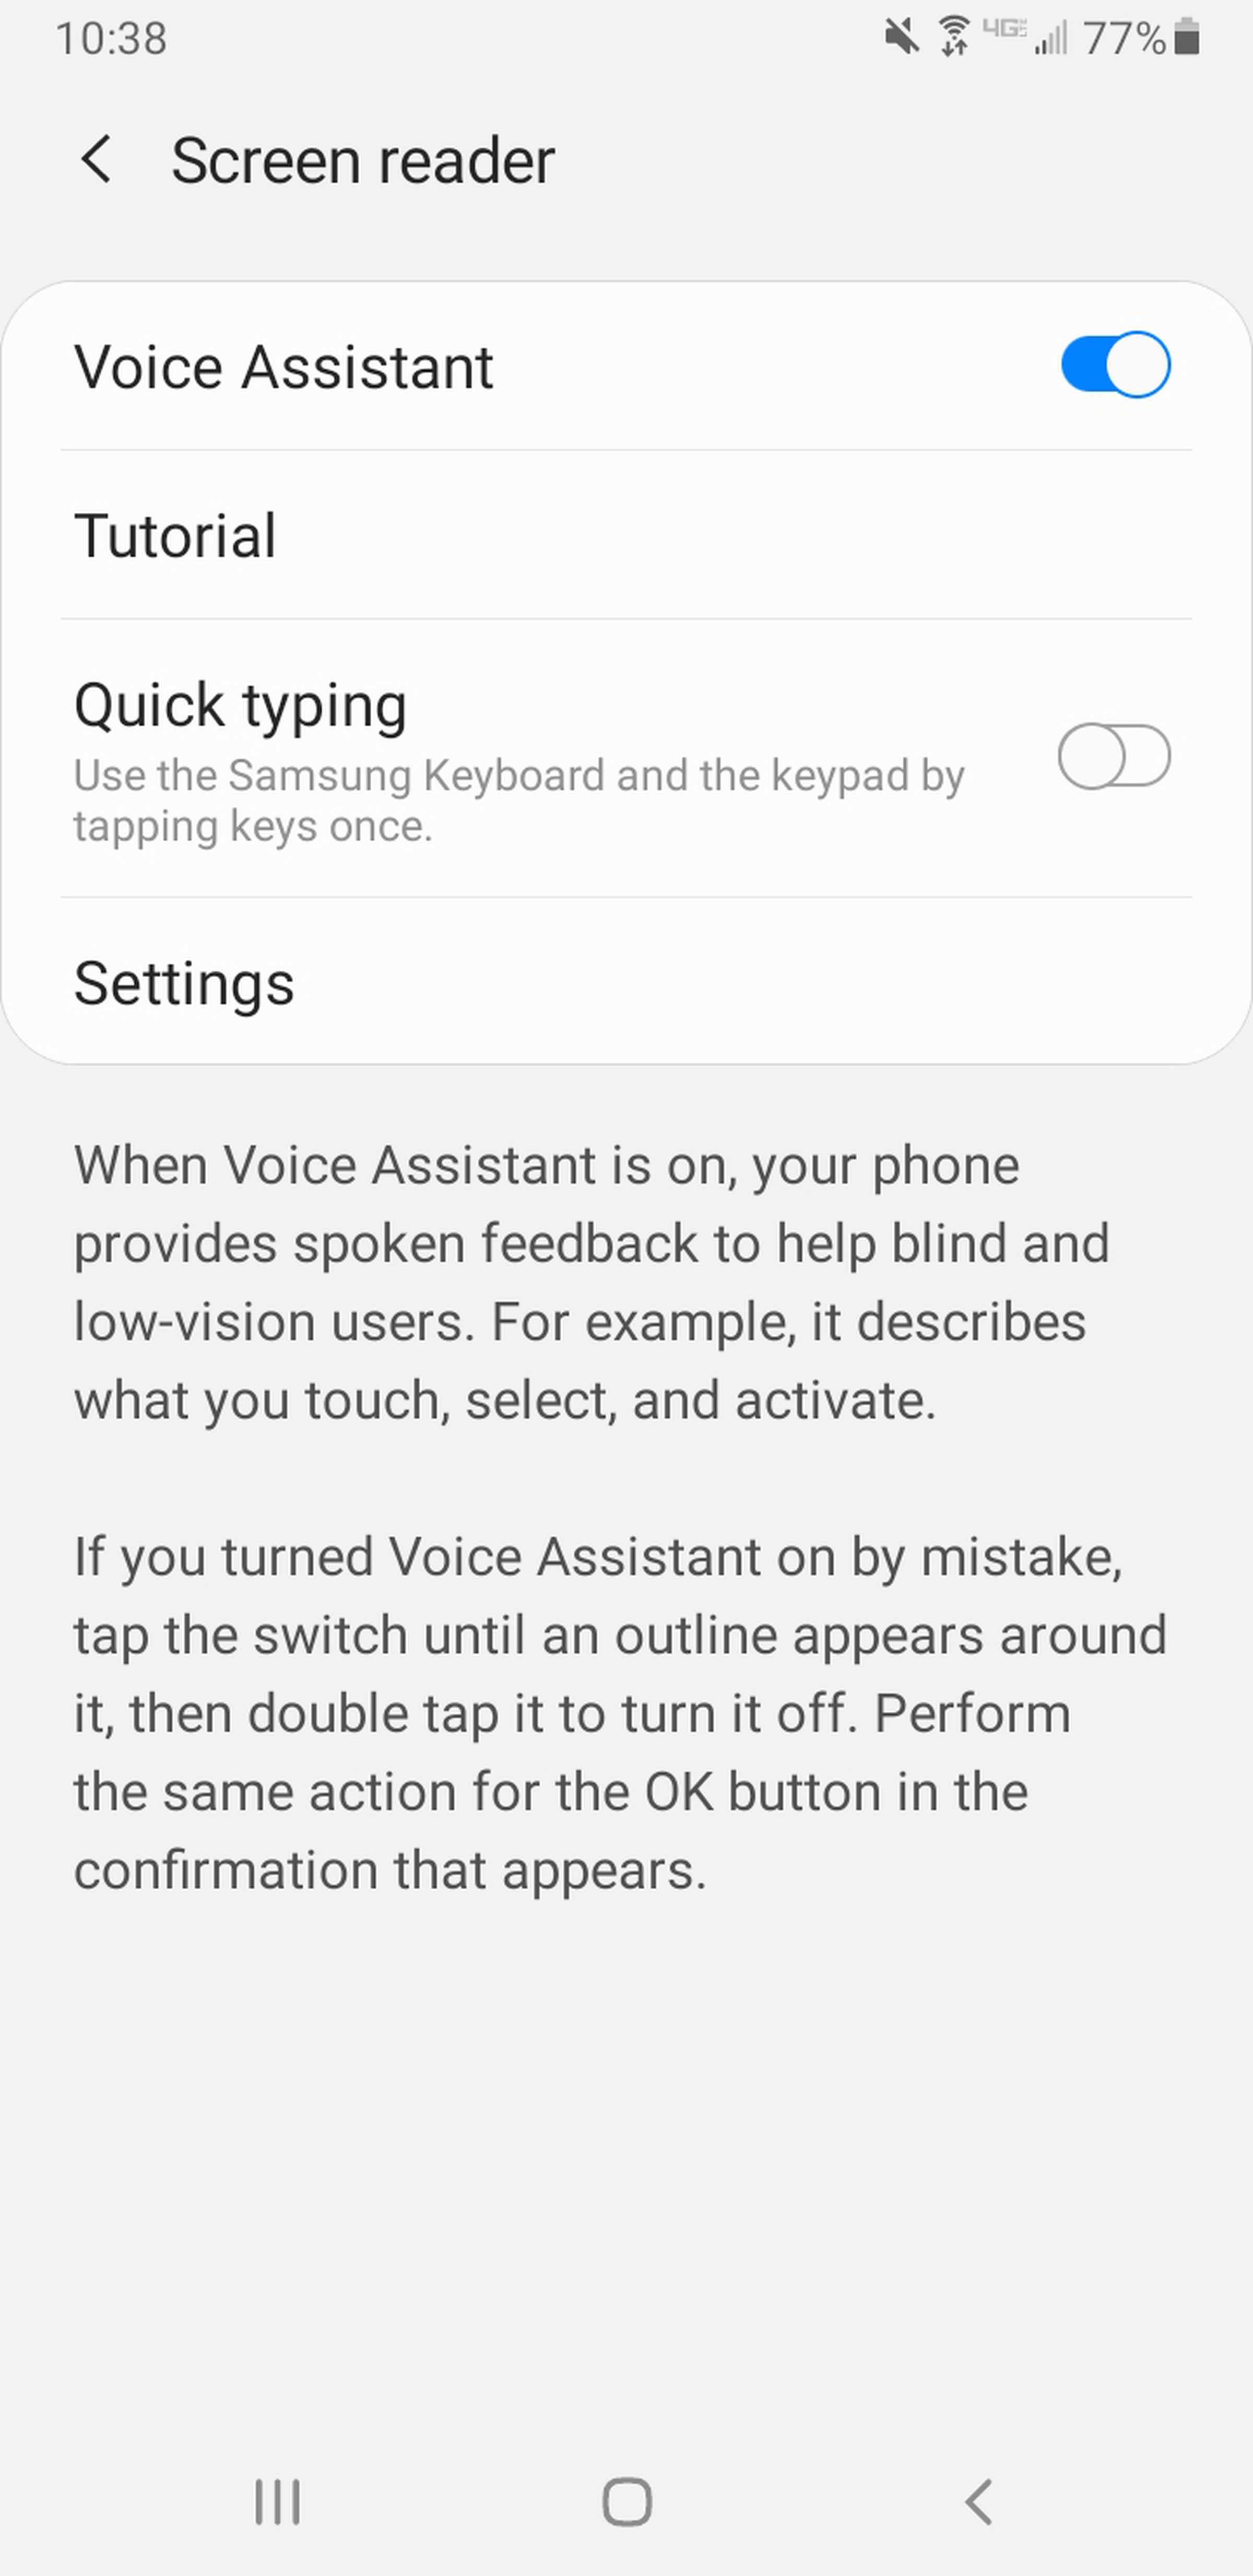  Toggle “Voice Assistant” on.